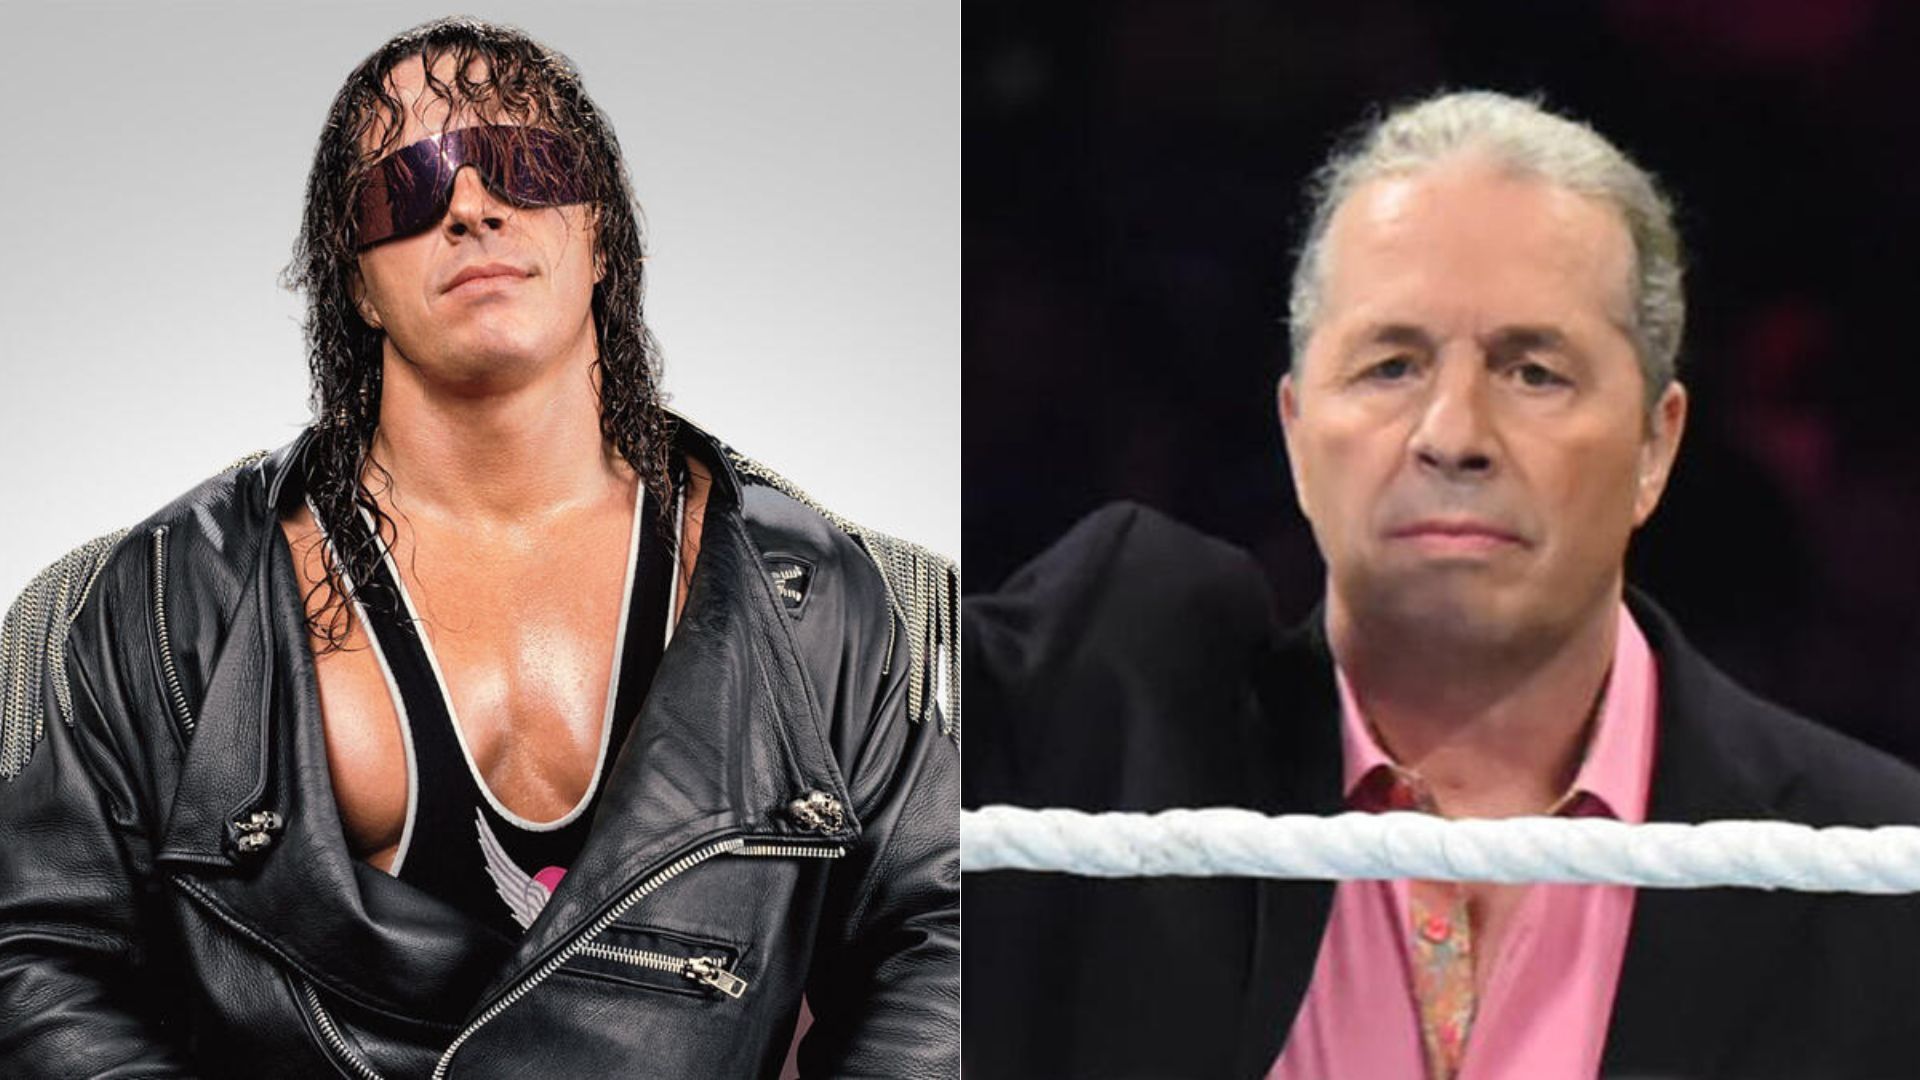 Former WCW and WWE star Bret Hart [Image Credit: wwe.com]